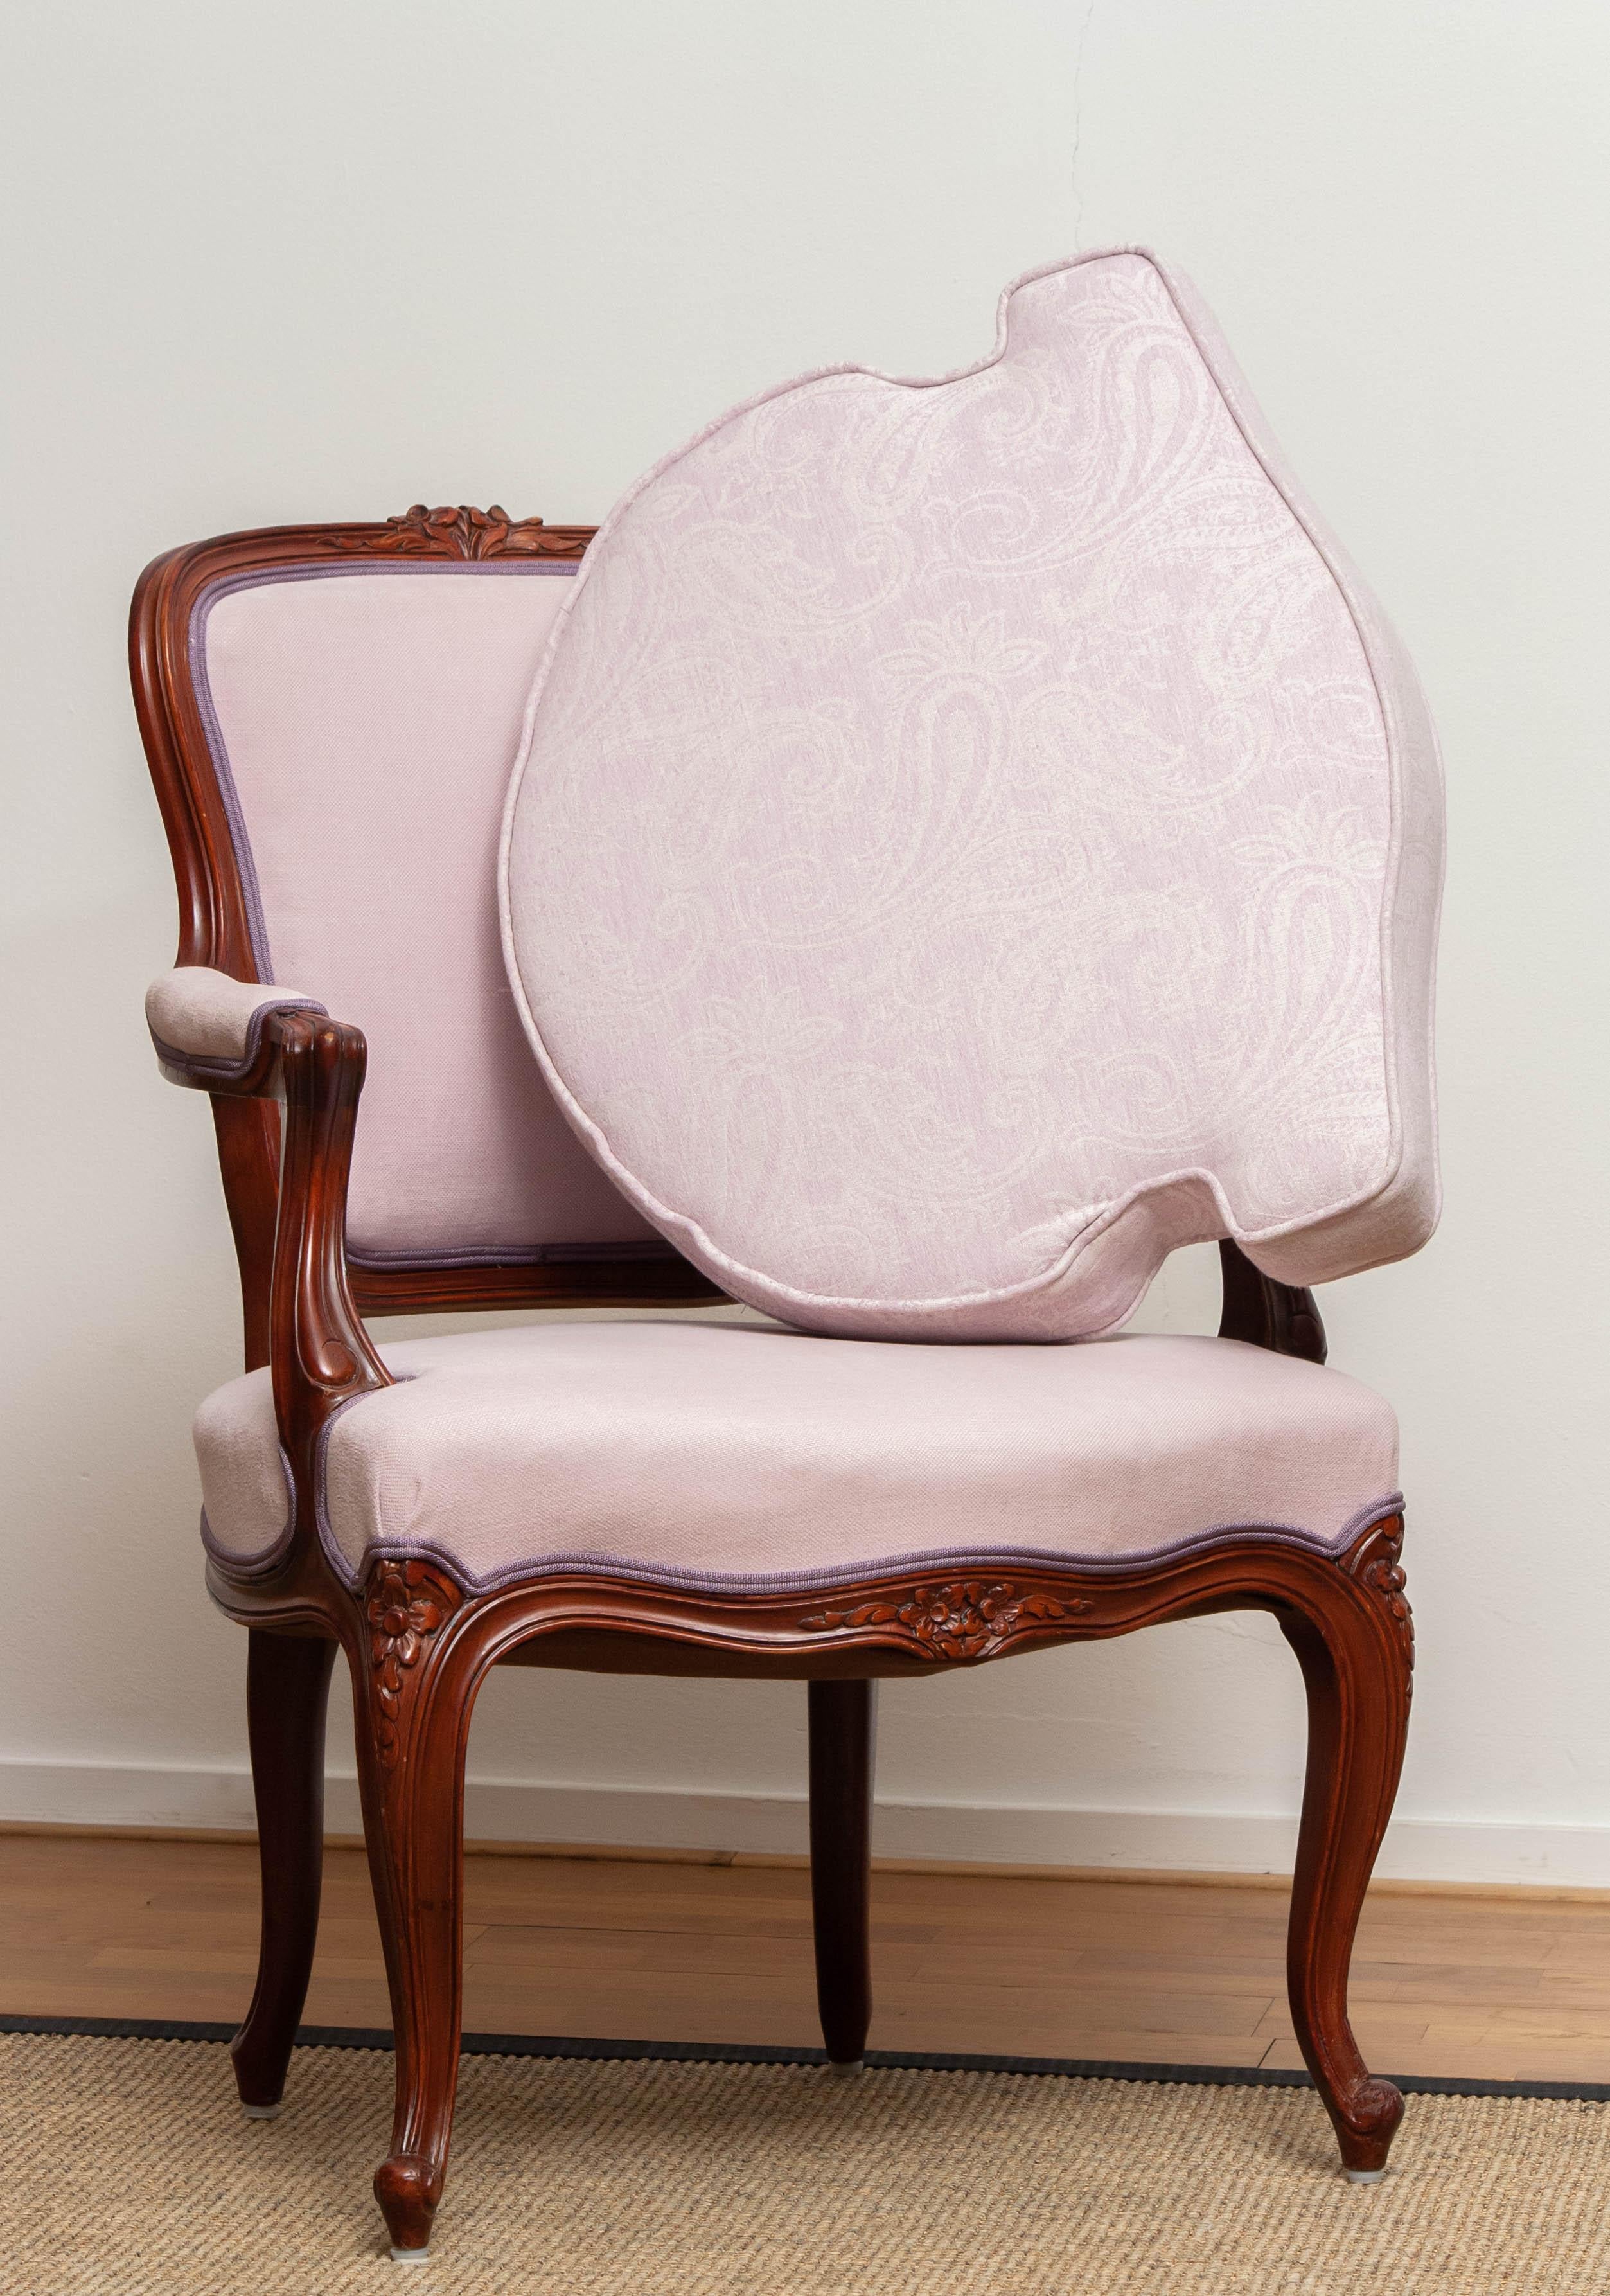 1950s, Pair of Pink Swedish Rococo Bergères in the Shabby Chic Technique Chairs 6